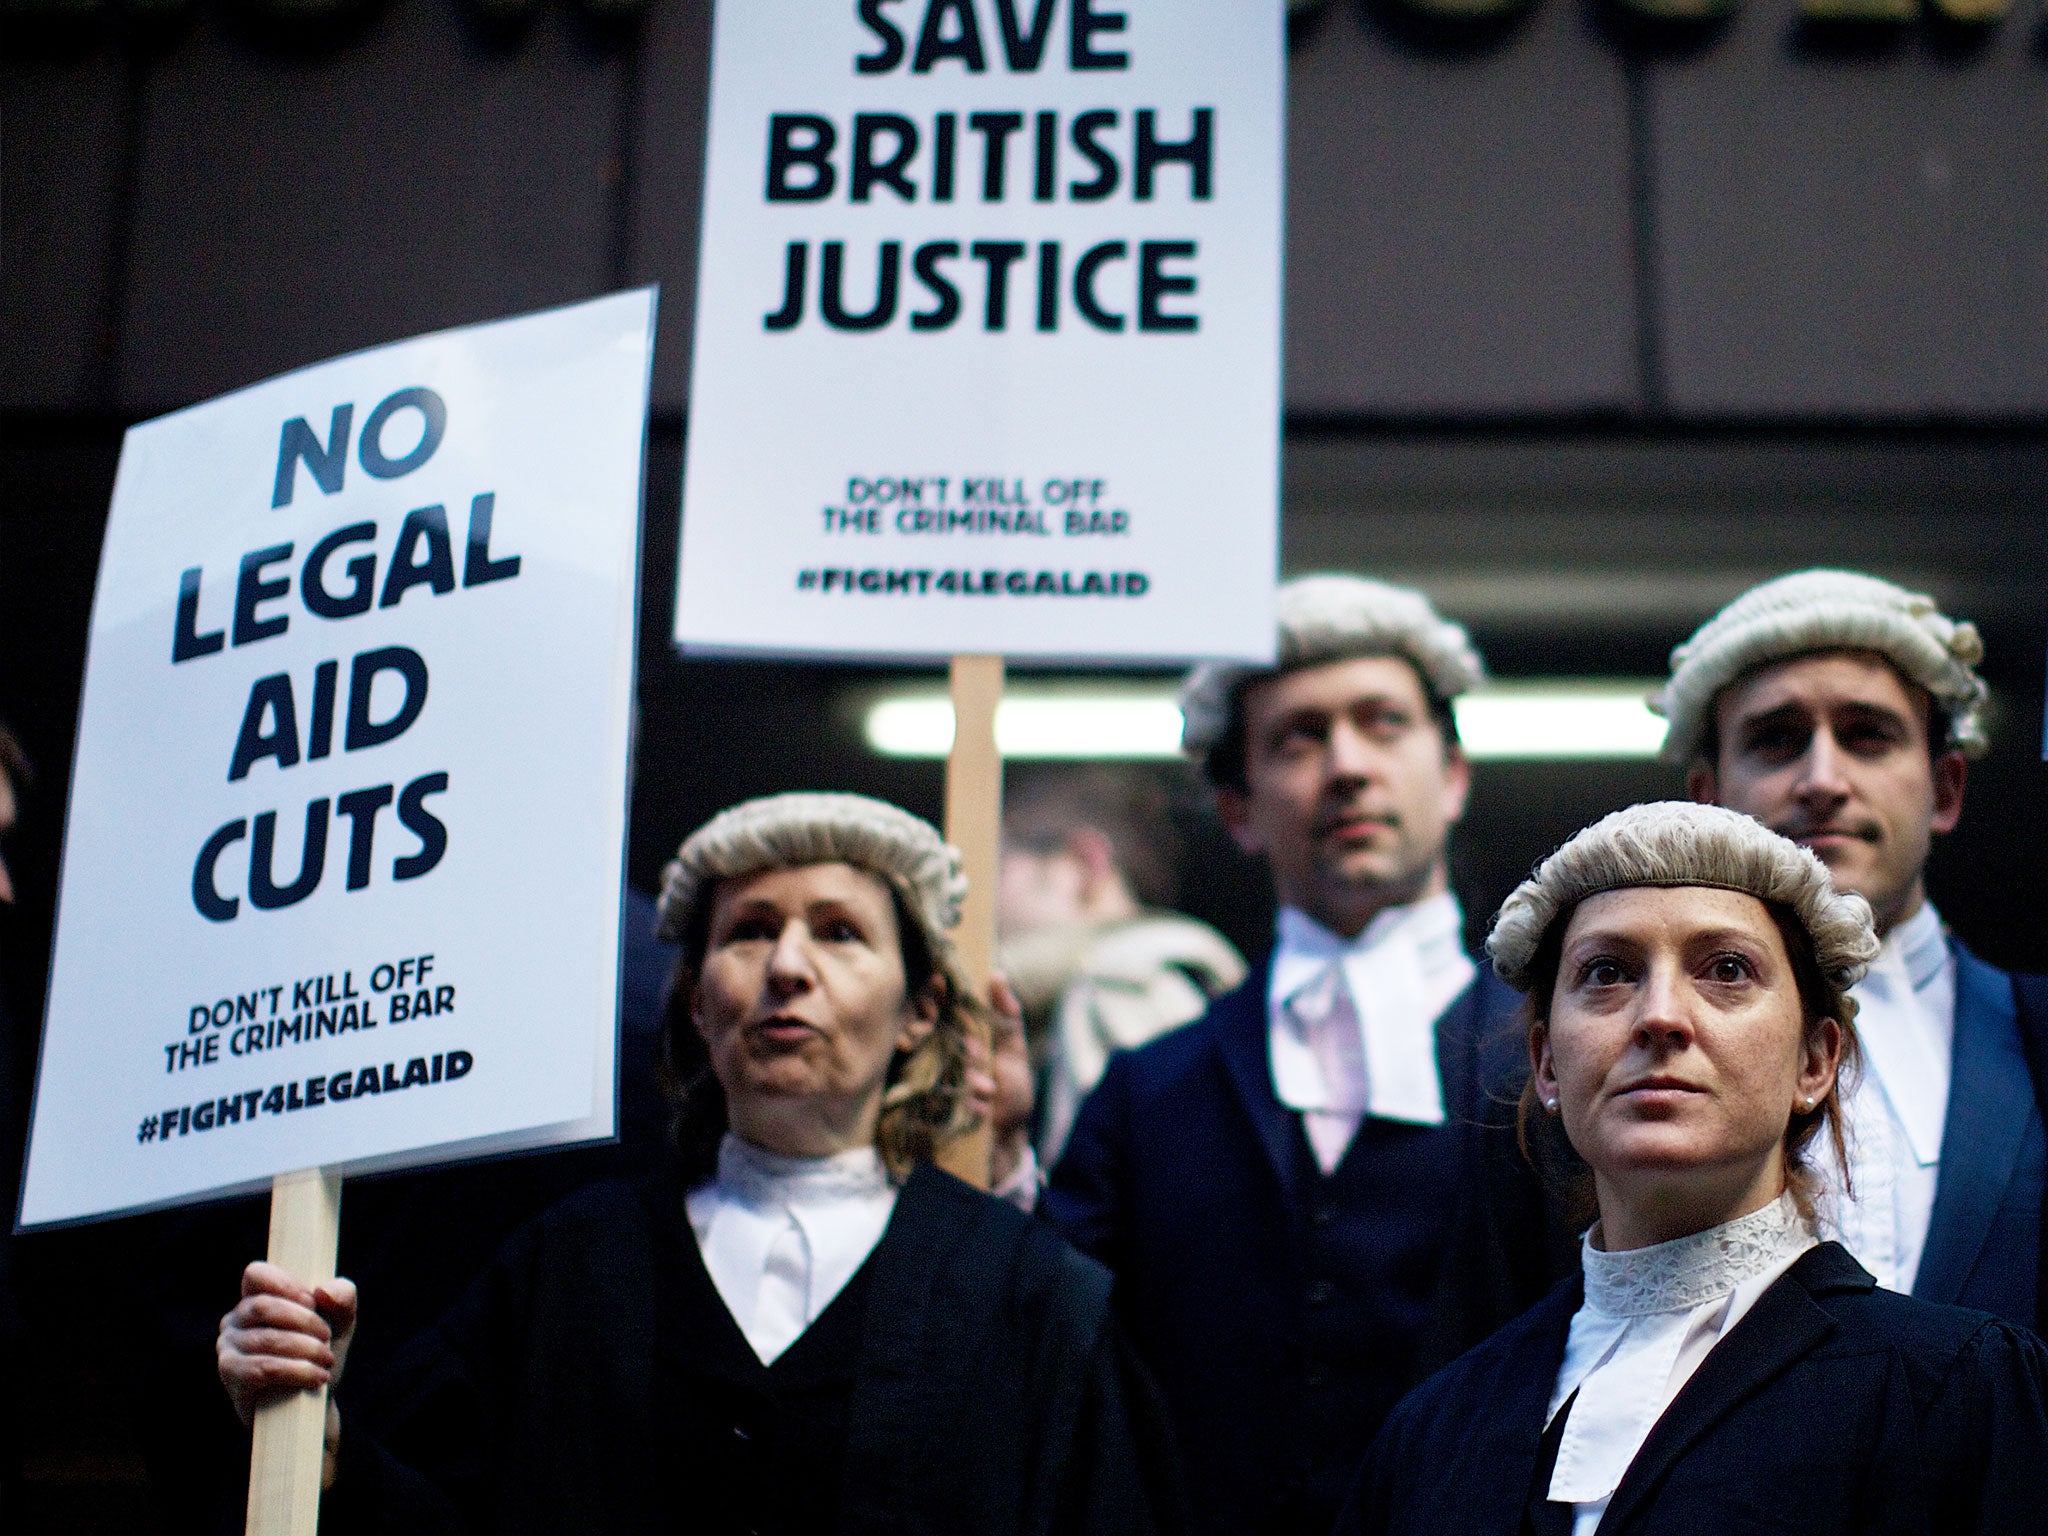 Our criminal defence lawyers are overworked, underpaid and subject to a climate of hostility